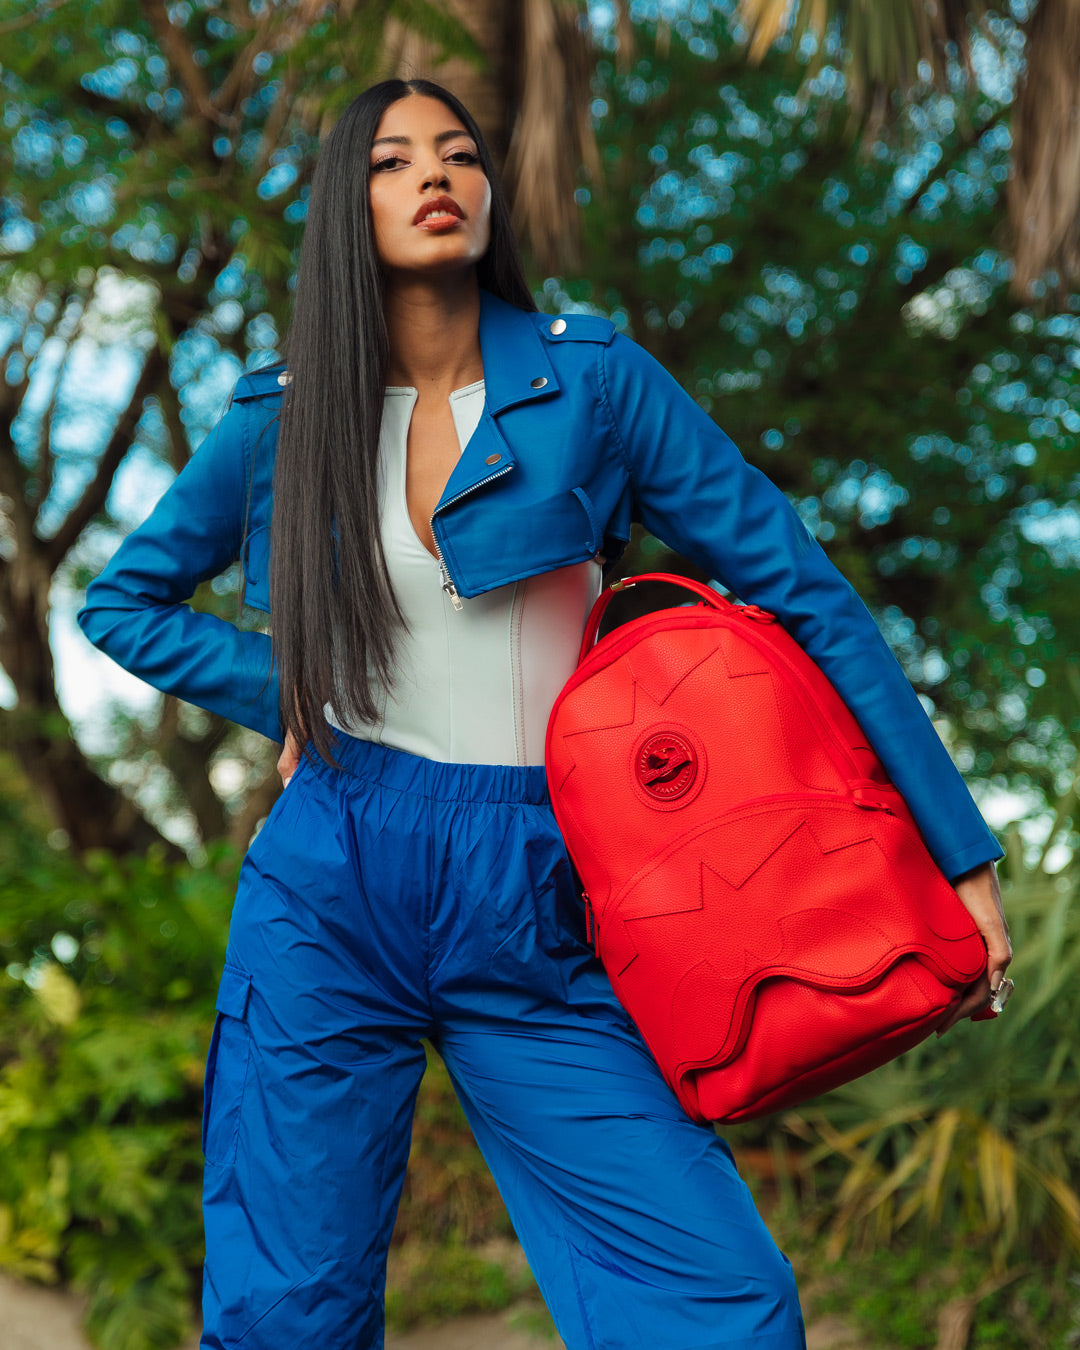 Sprayground Backpack in Red